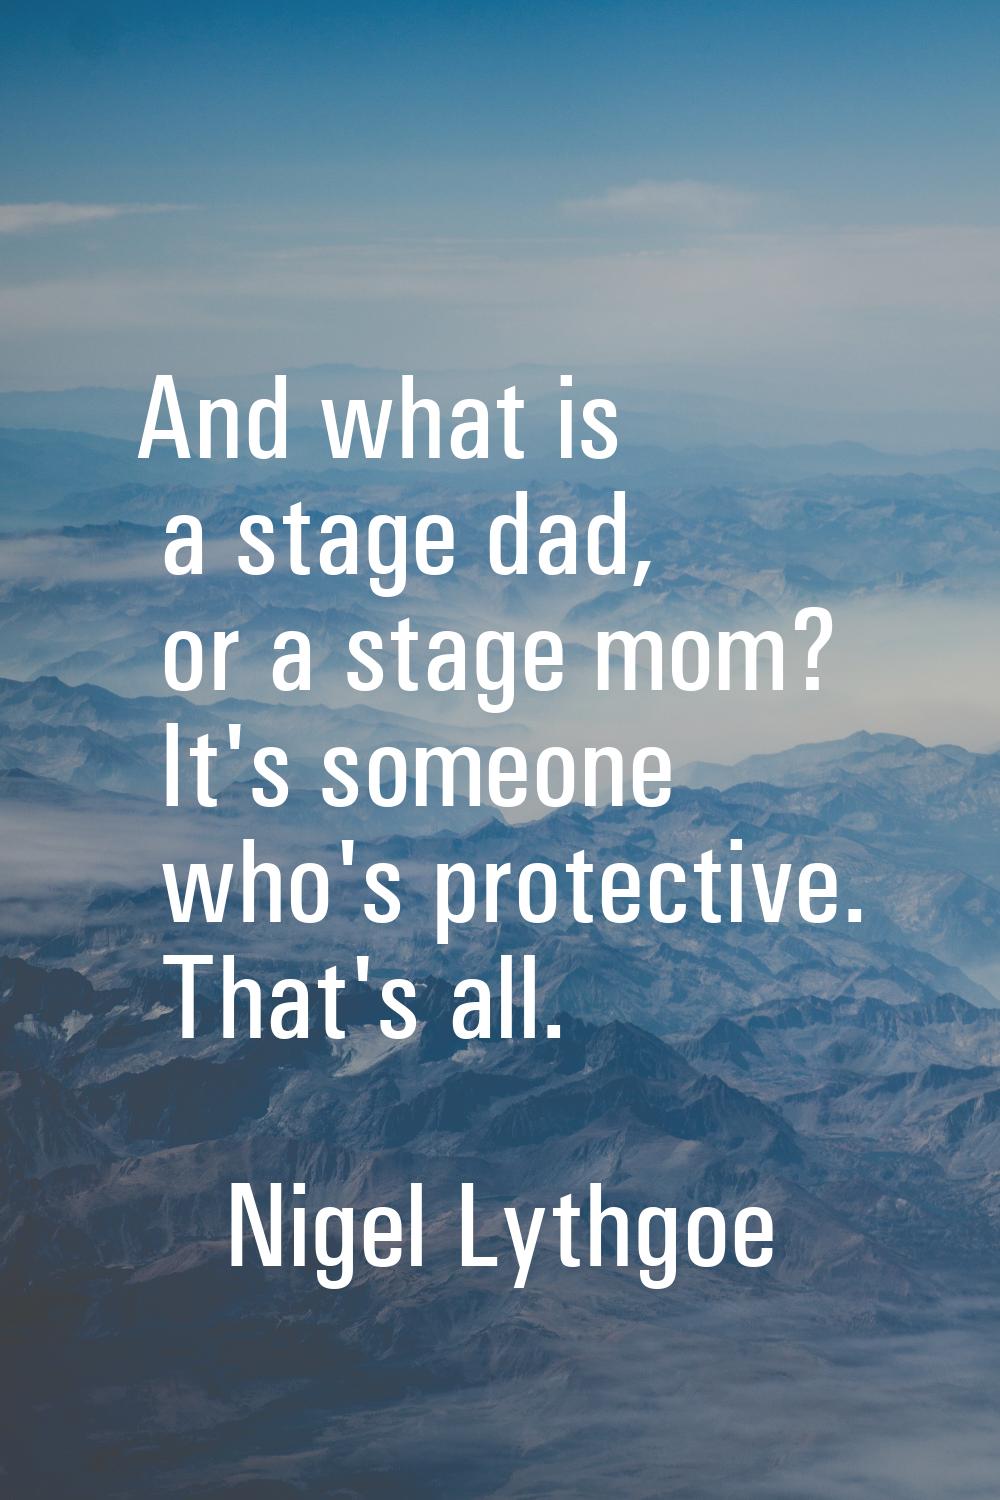 And what is a stage dad, or a stage mom? It's someone who's protective. That's all.